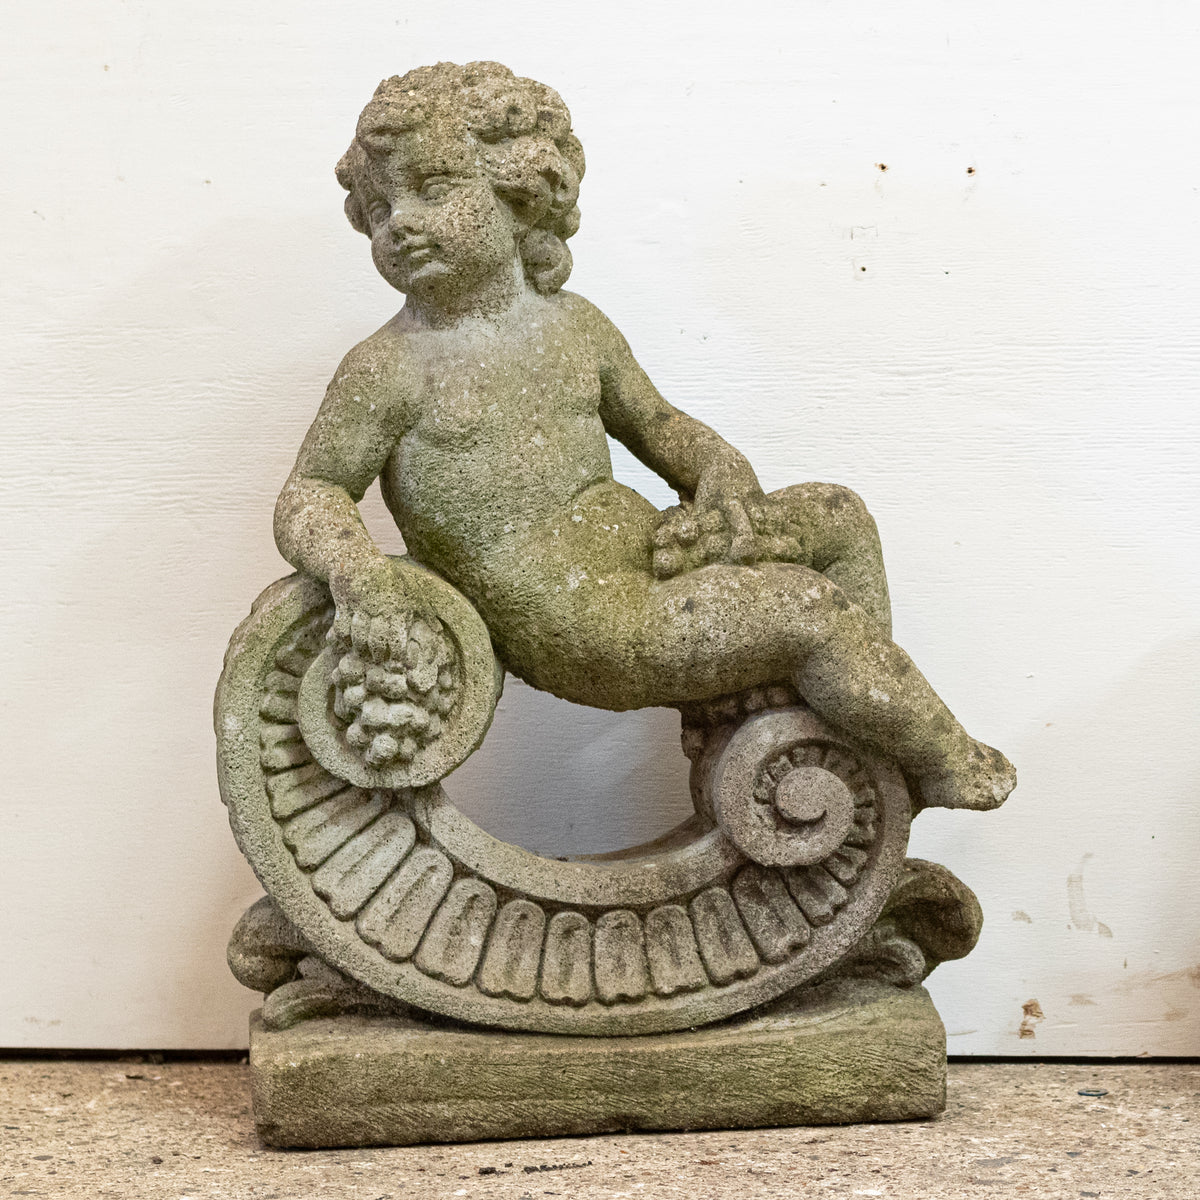 Reclaimed Pair of Carved Cherub Statues | Garden Putti | The Architectural Forum